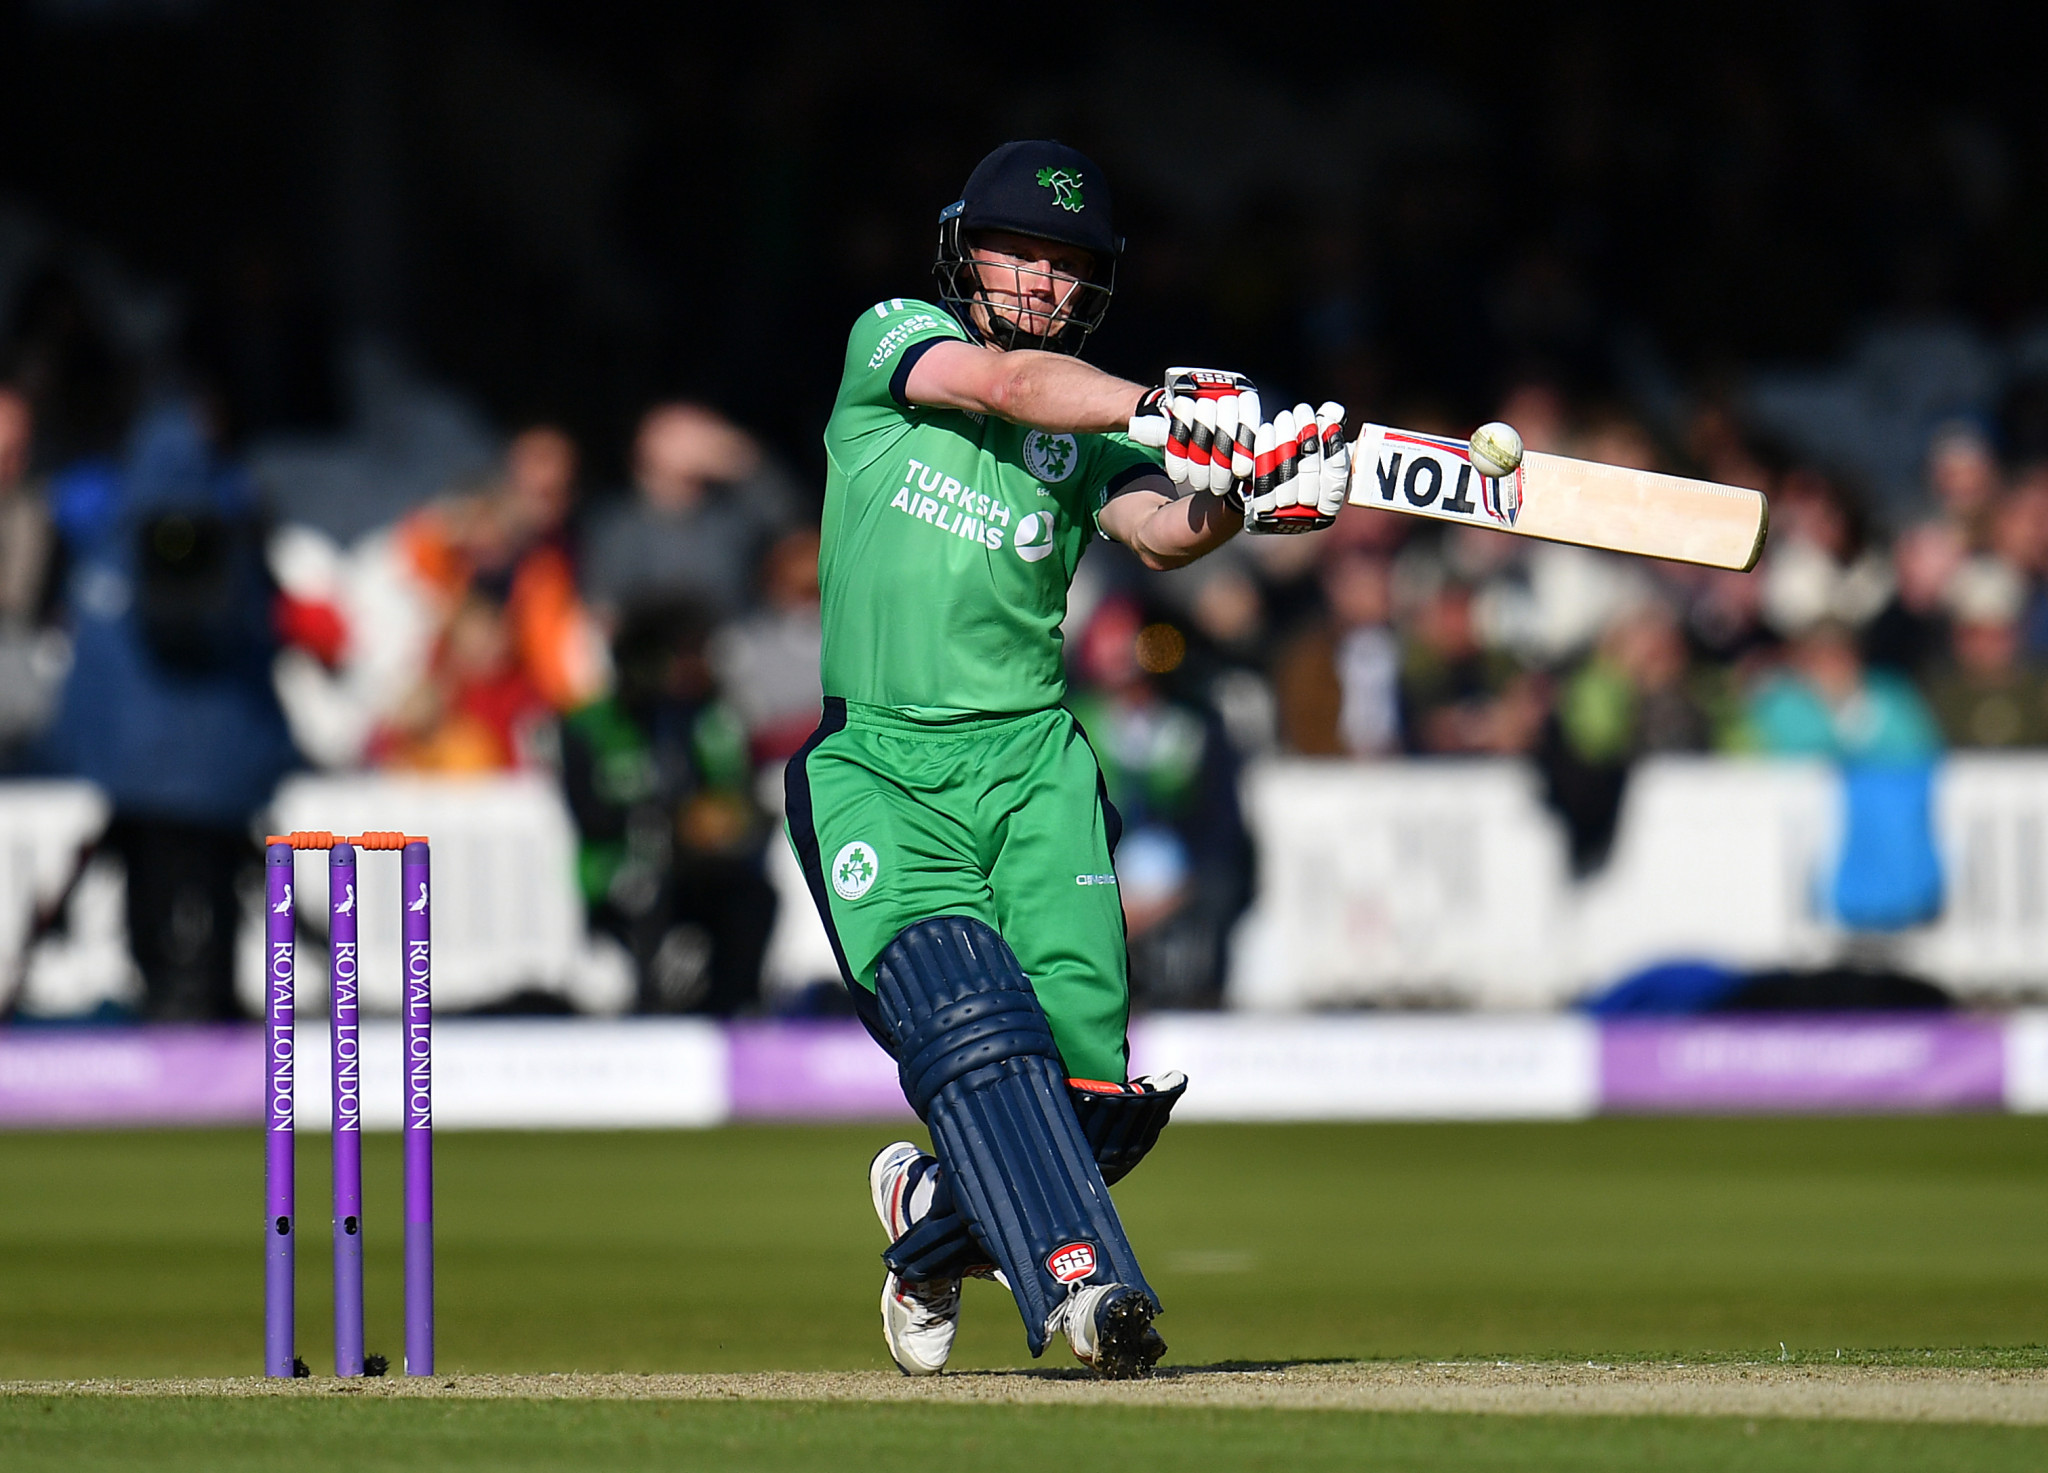 Irish cricketers to play Pakistan in first test match